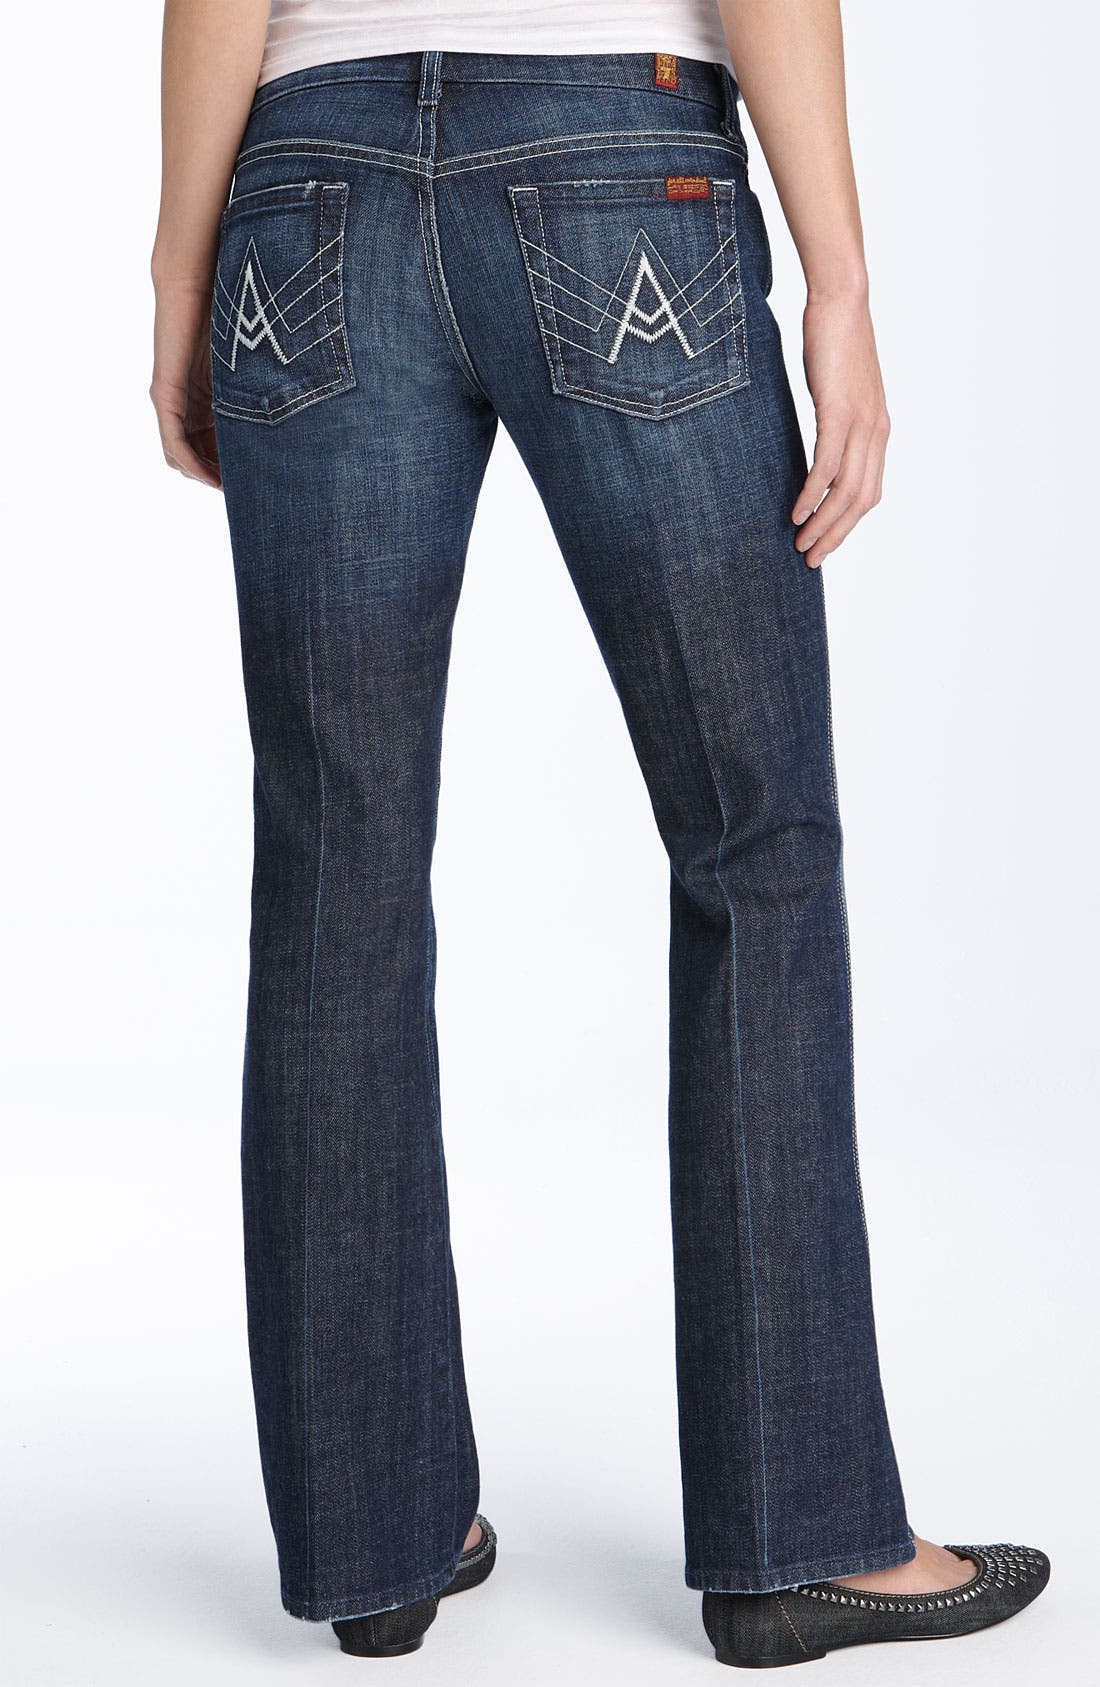 7 for all mankind flip flop jeans